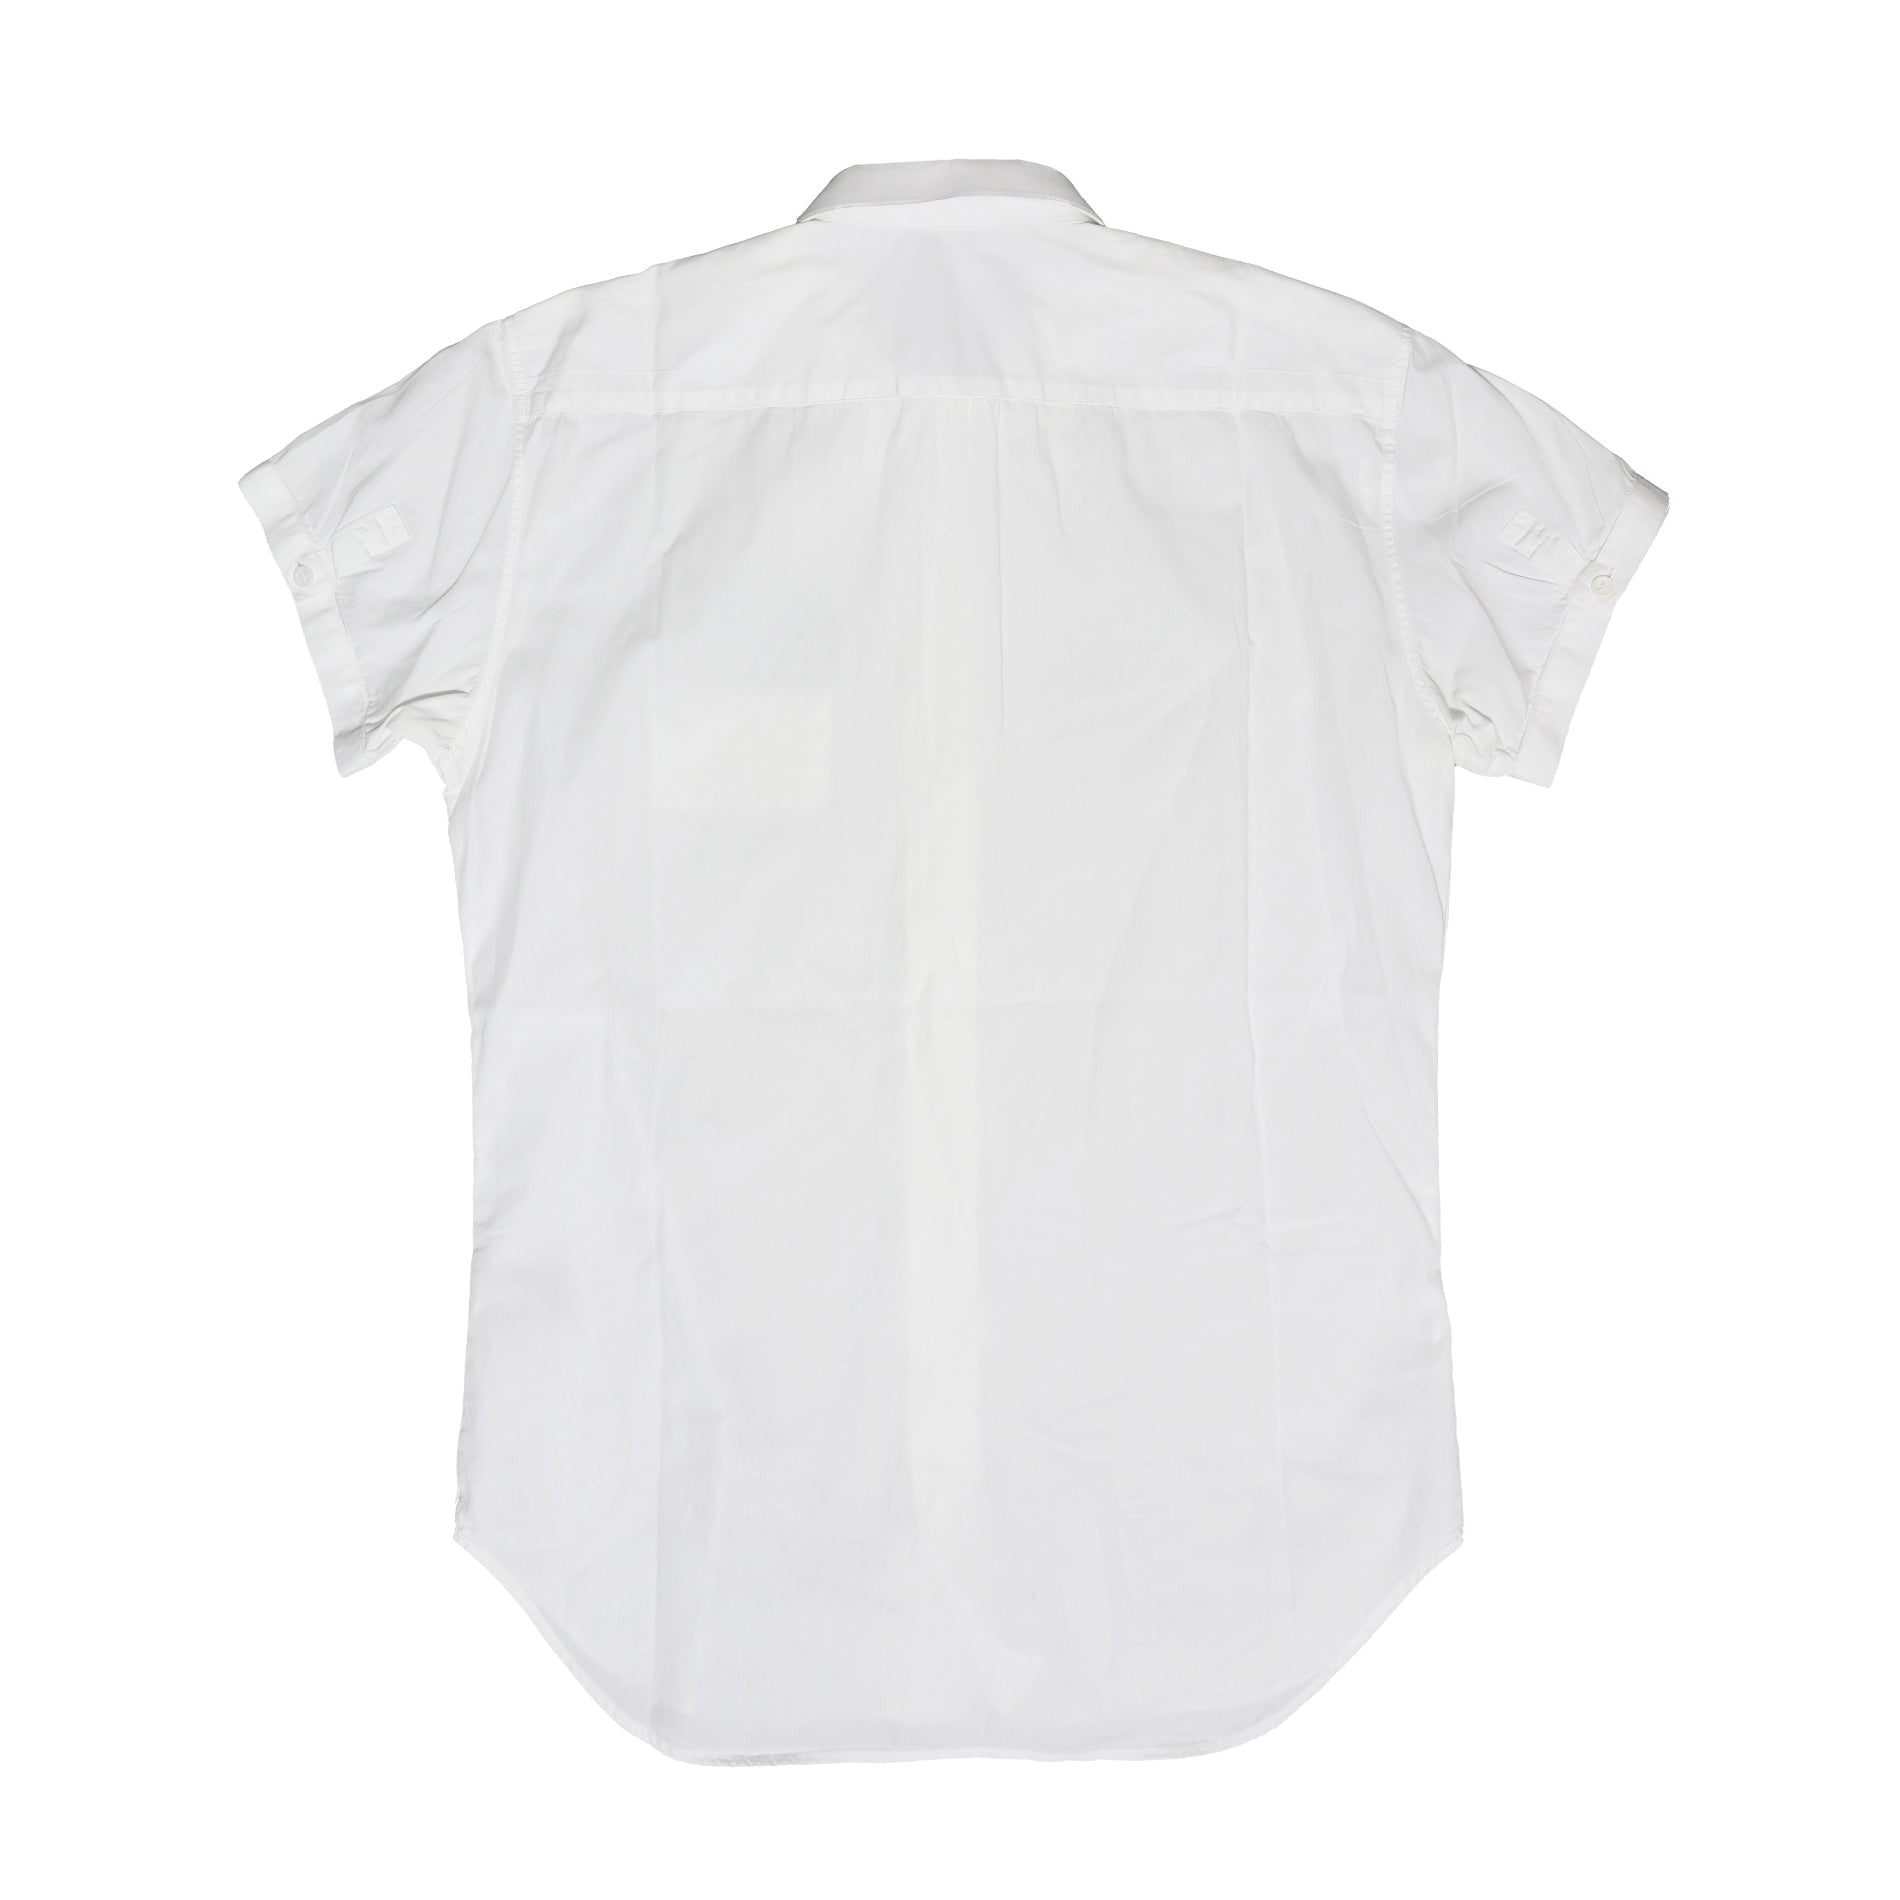 Dior Homme SS08 Nylon Patch Shirt